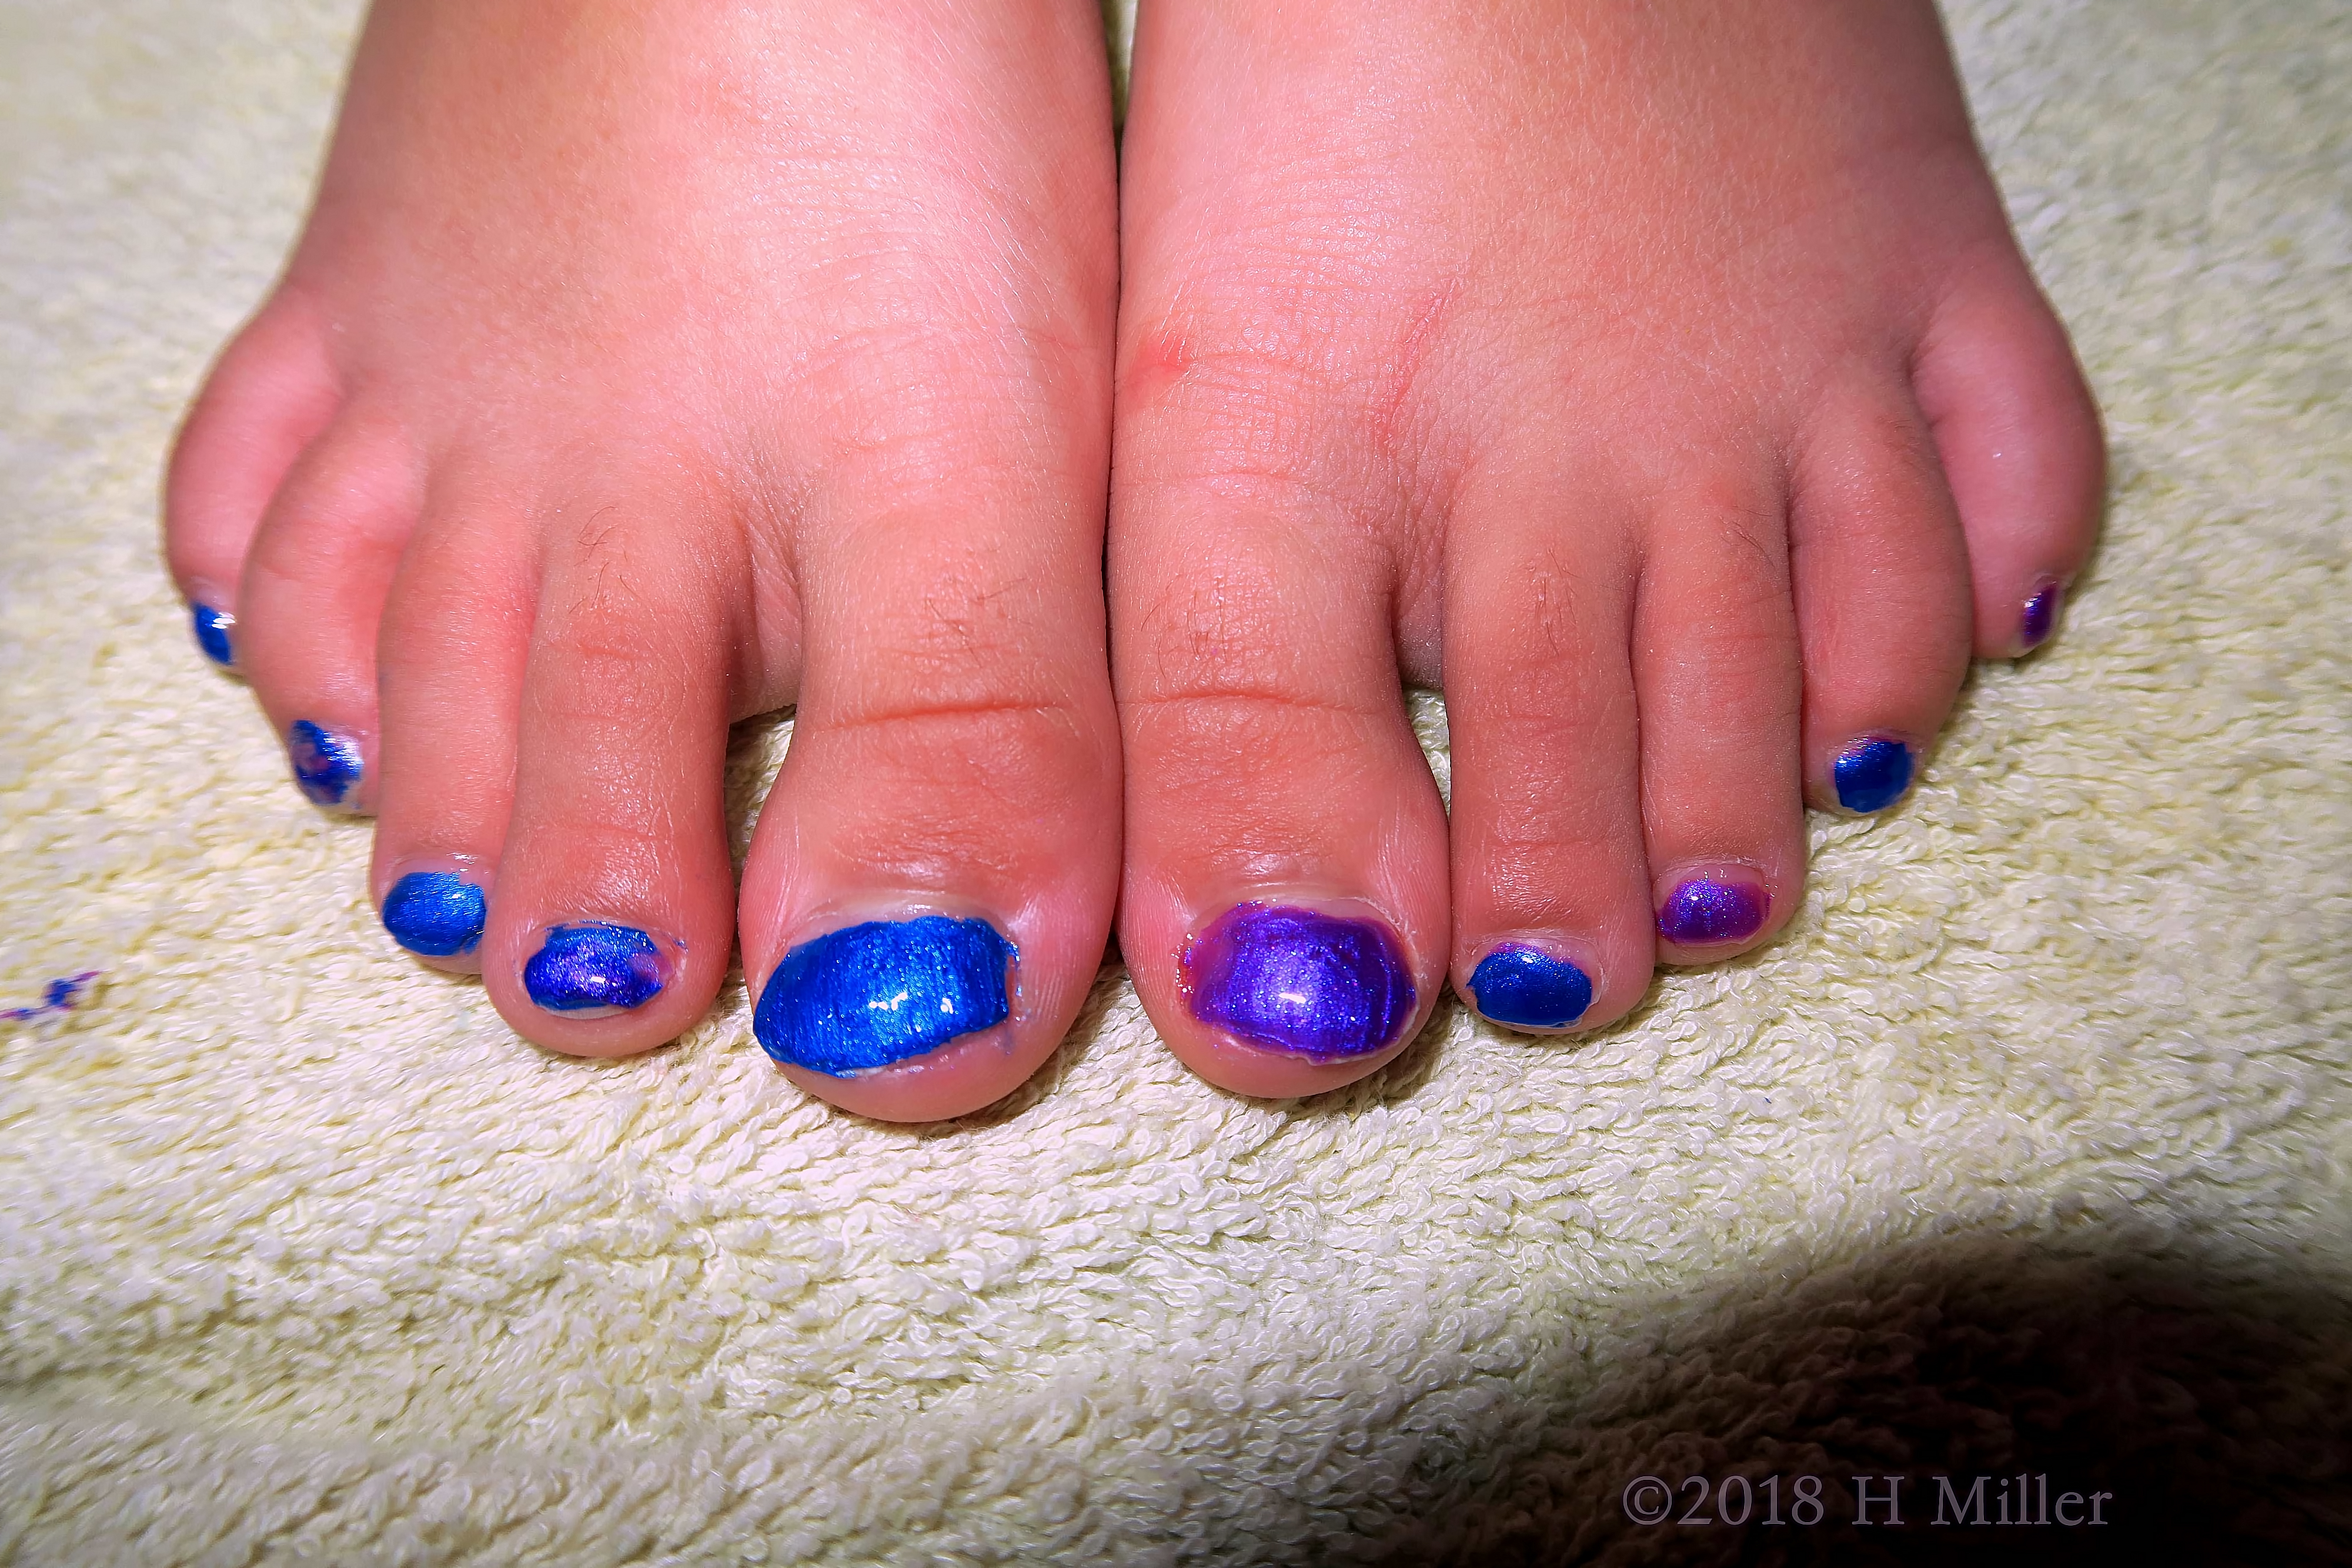 We Know Which Kids Pedicure Color Is Her Favorite! 